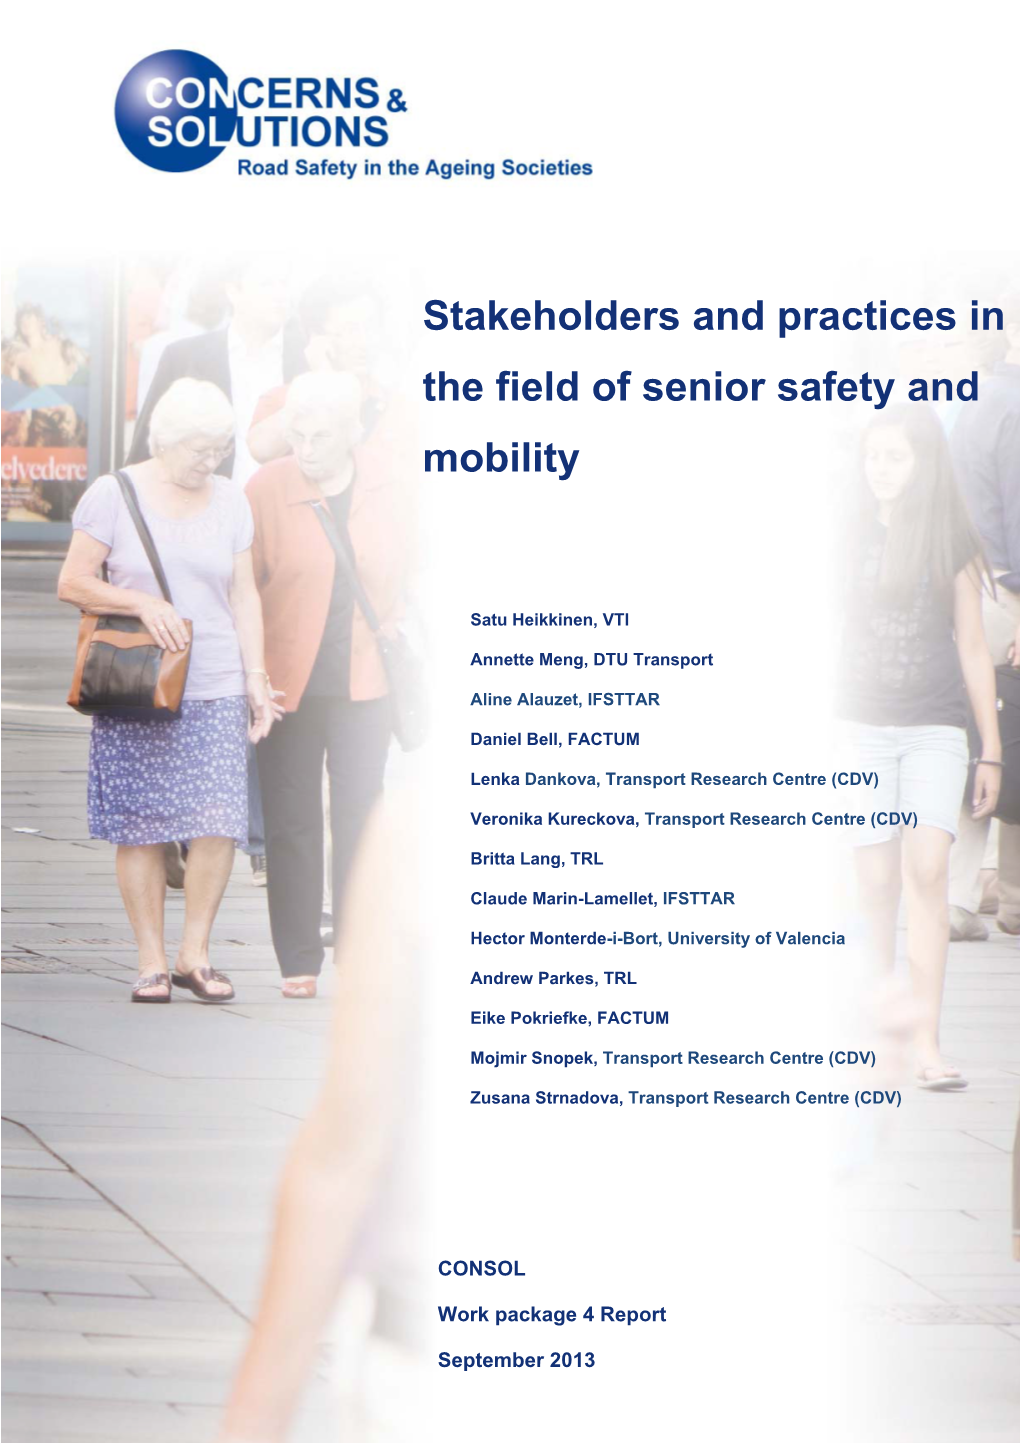 Stakeholders and Practices in the Field of Senior Safety and Mobility